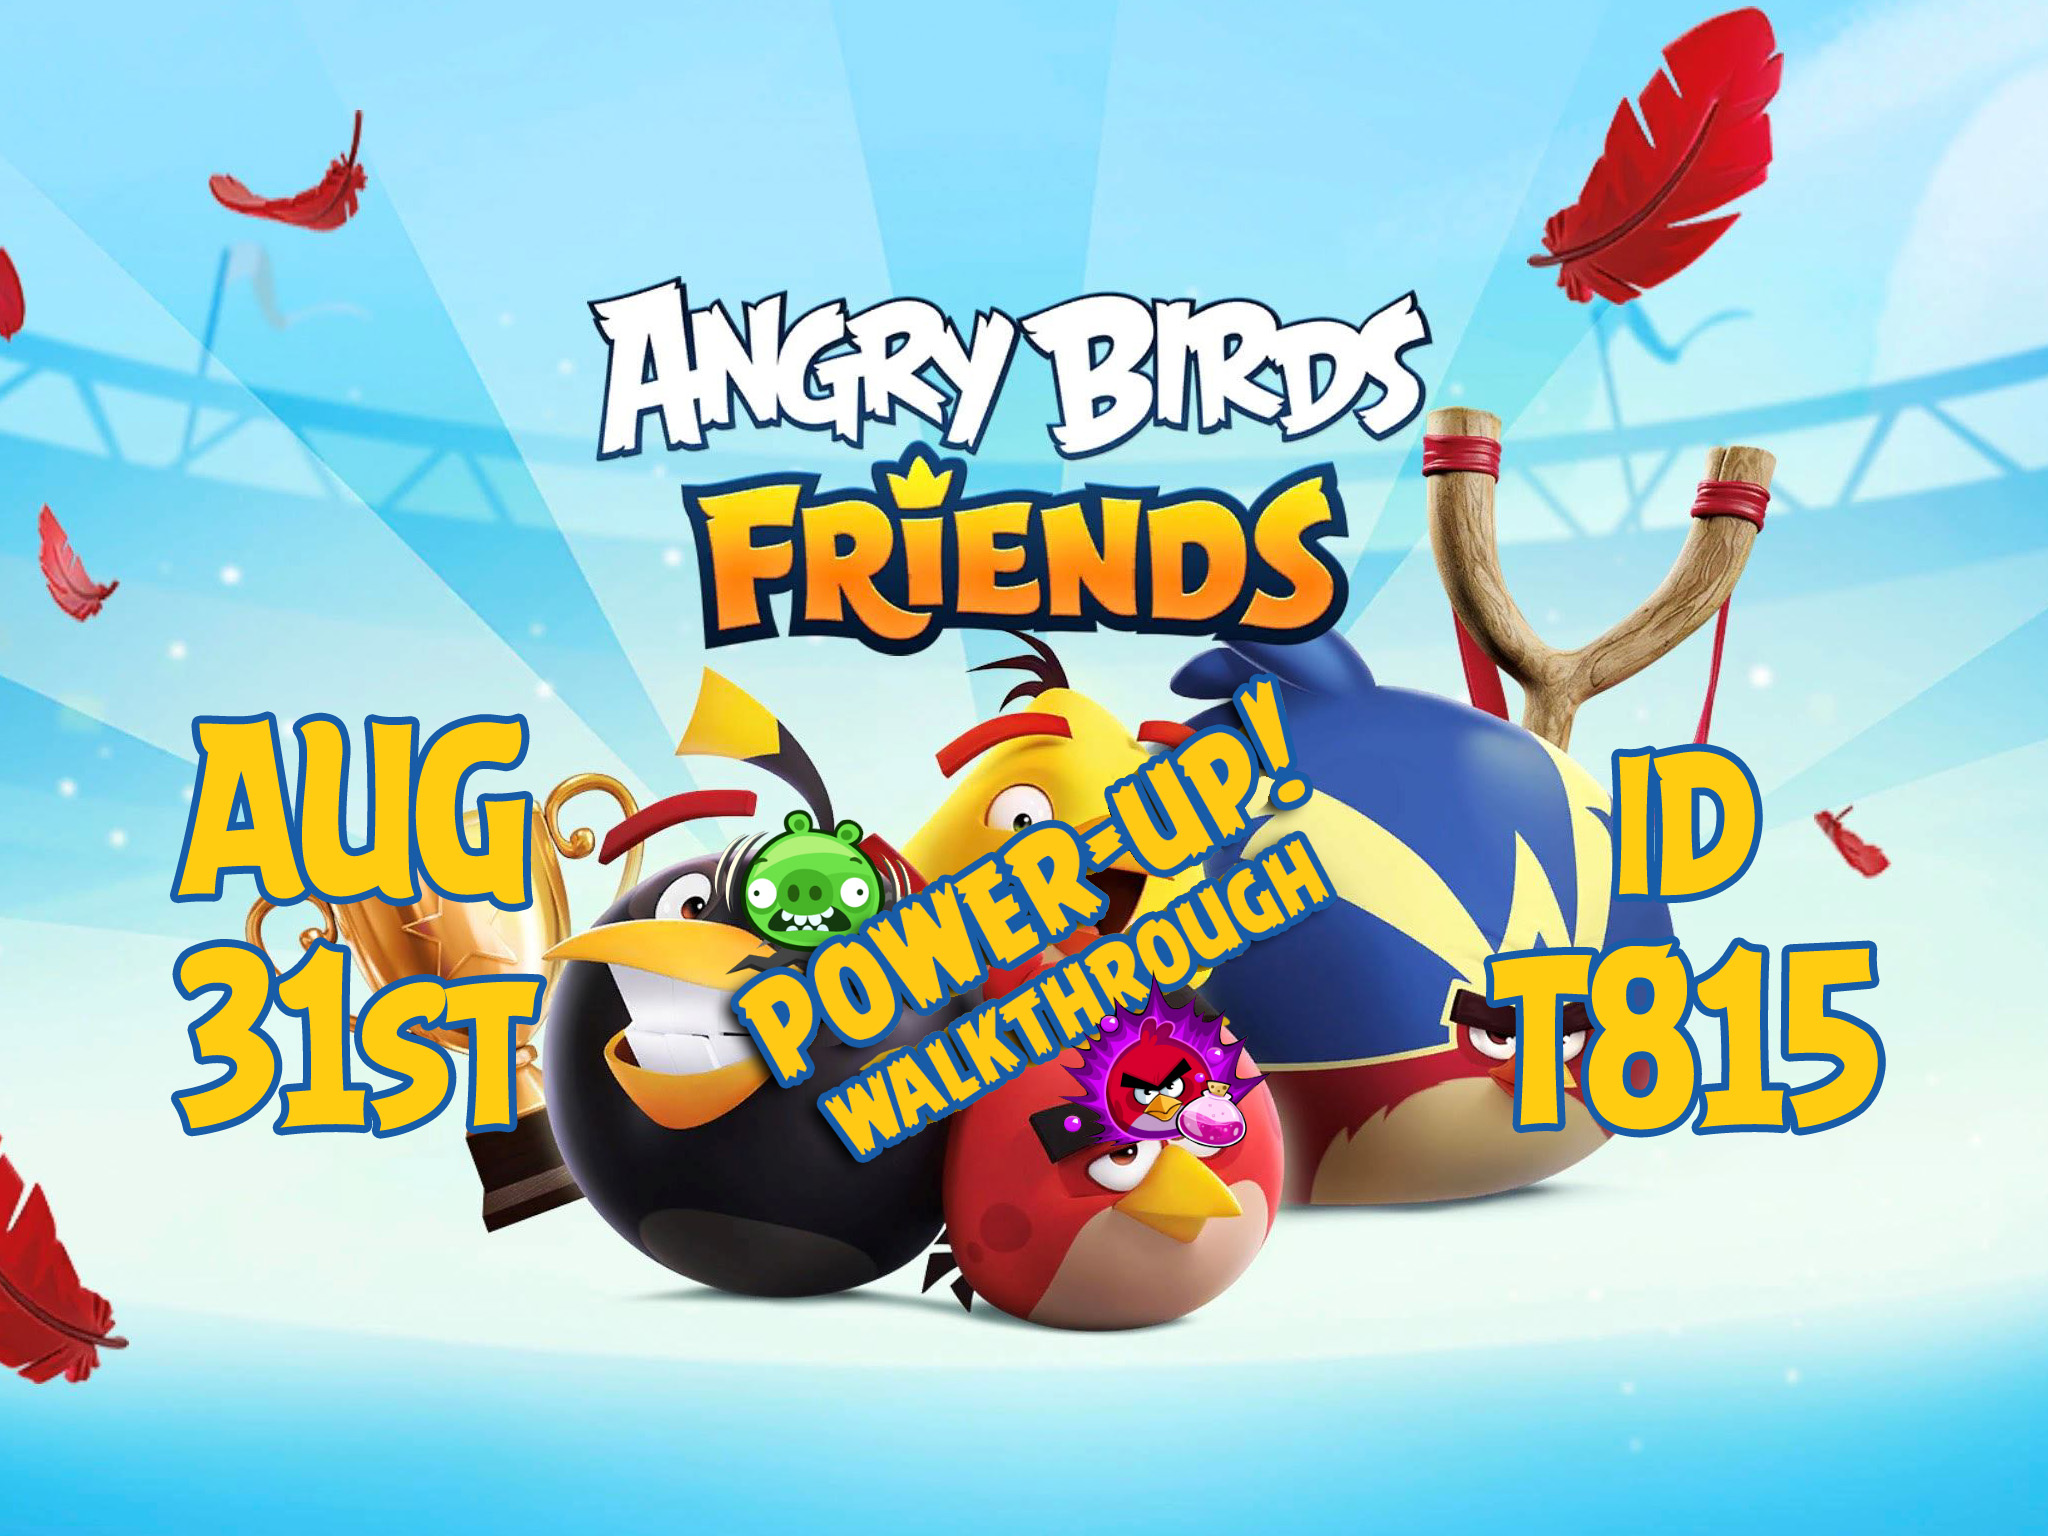 Angry-Birds-Friends-Tournament-T815a-Feature-Image-PU